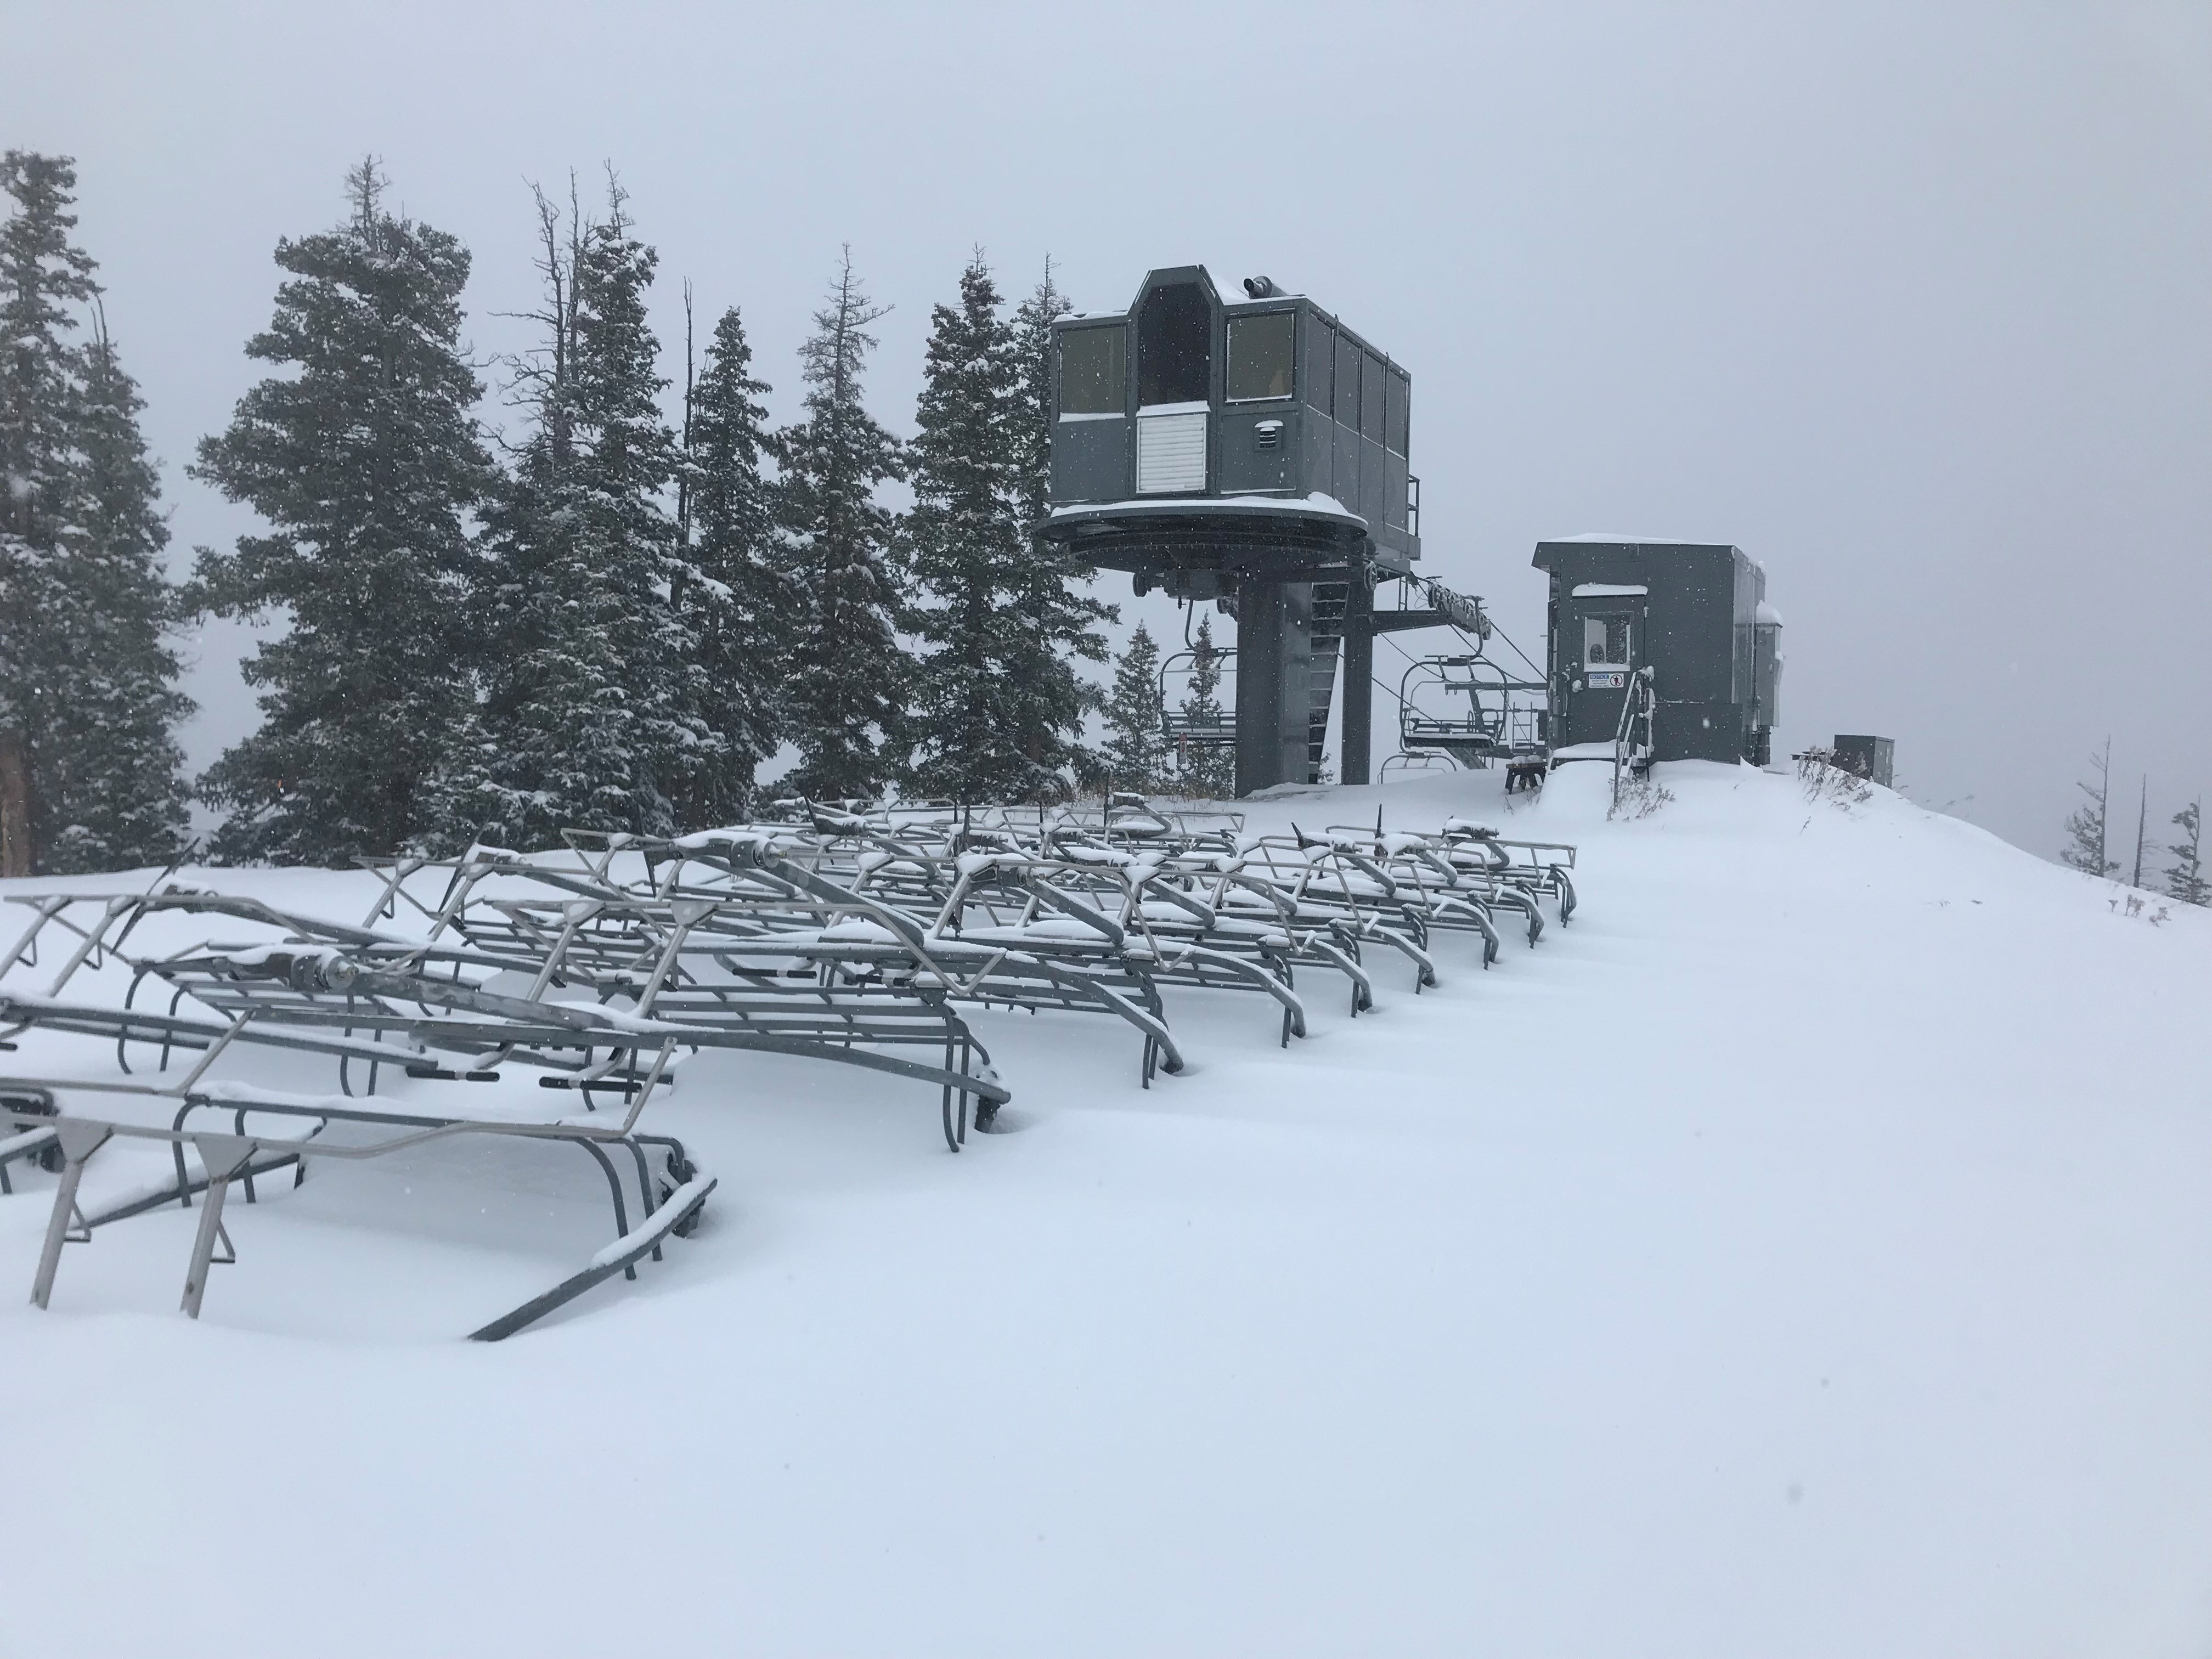 Telluride early snow 2018 - top of 6